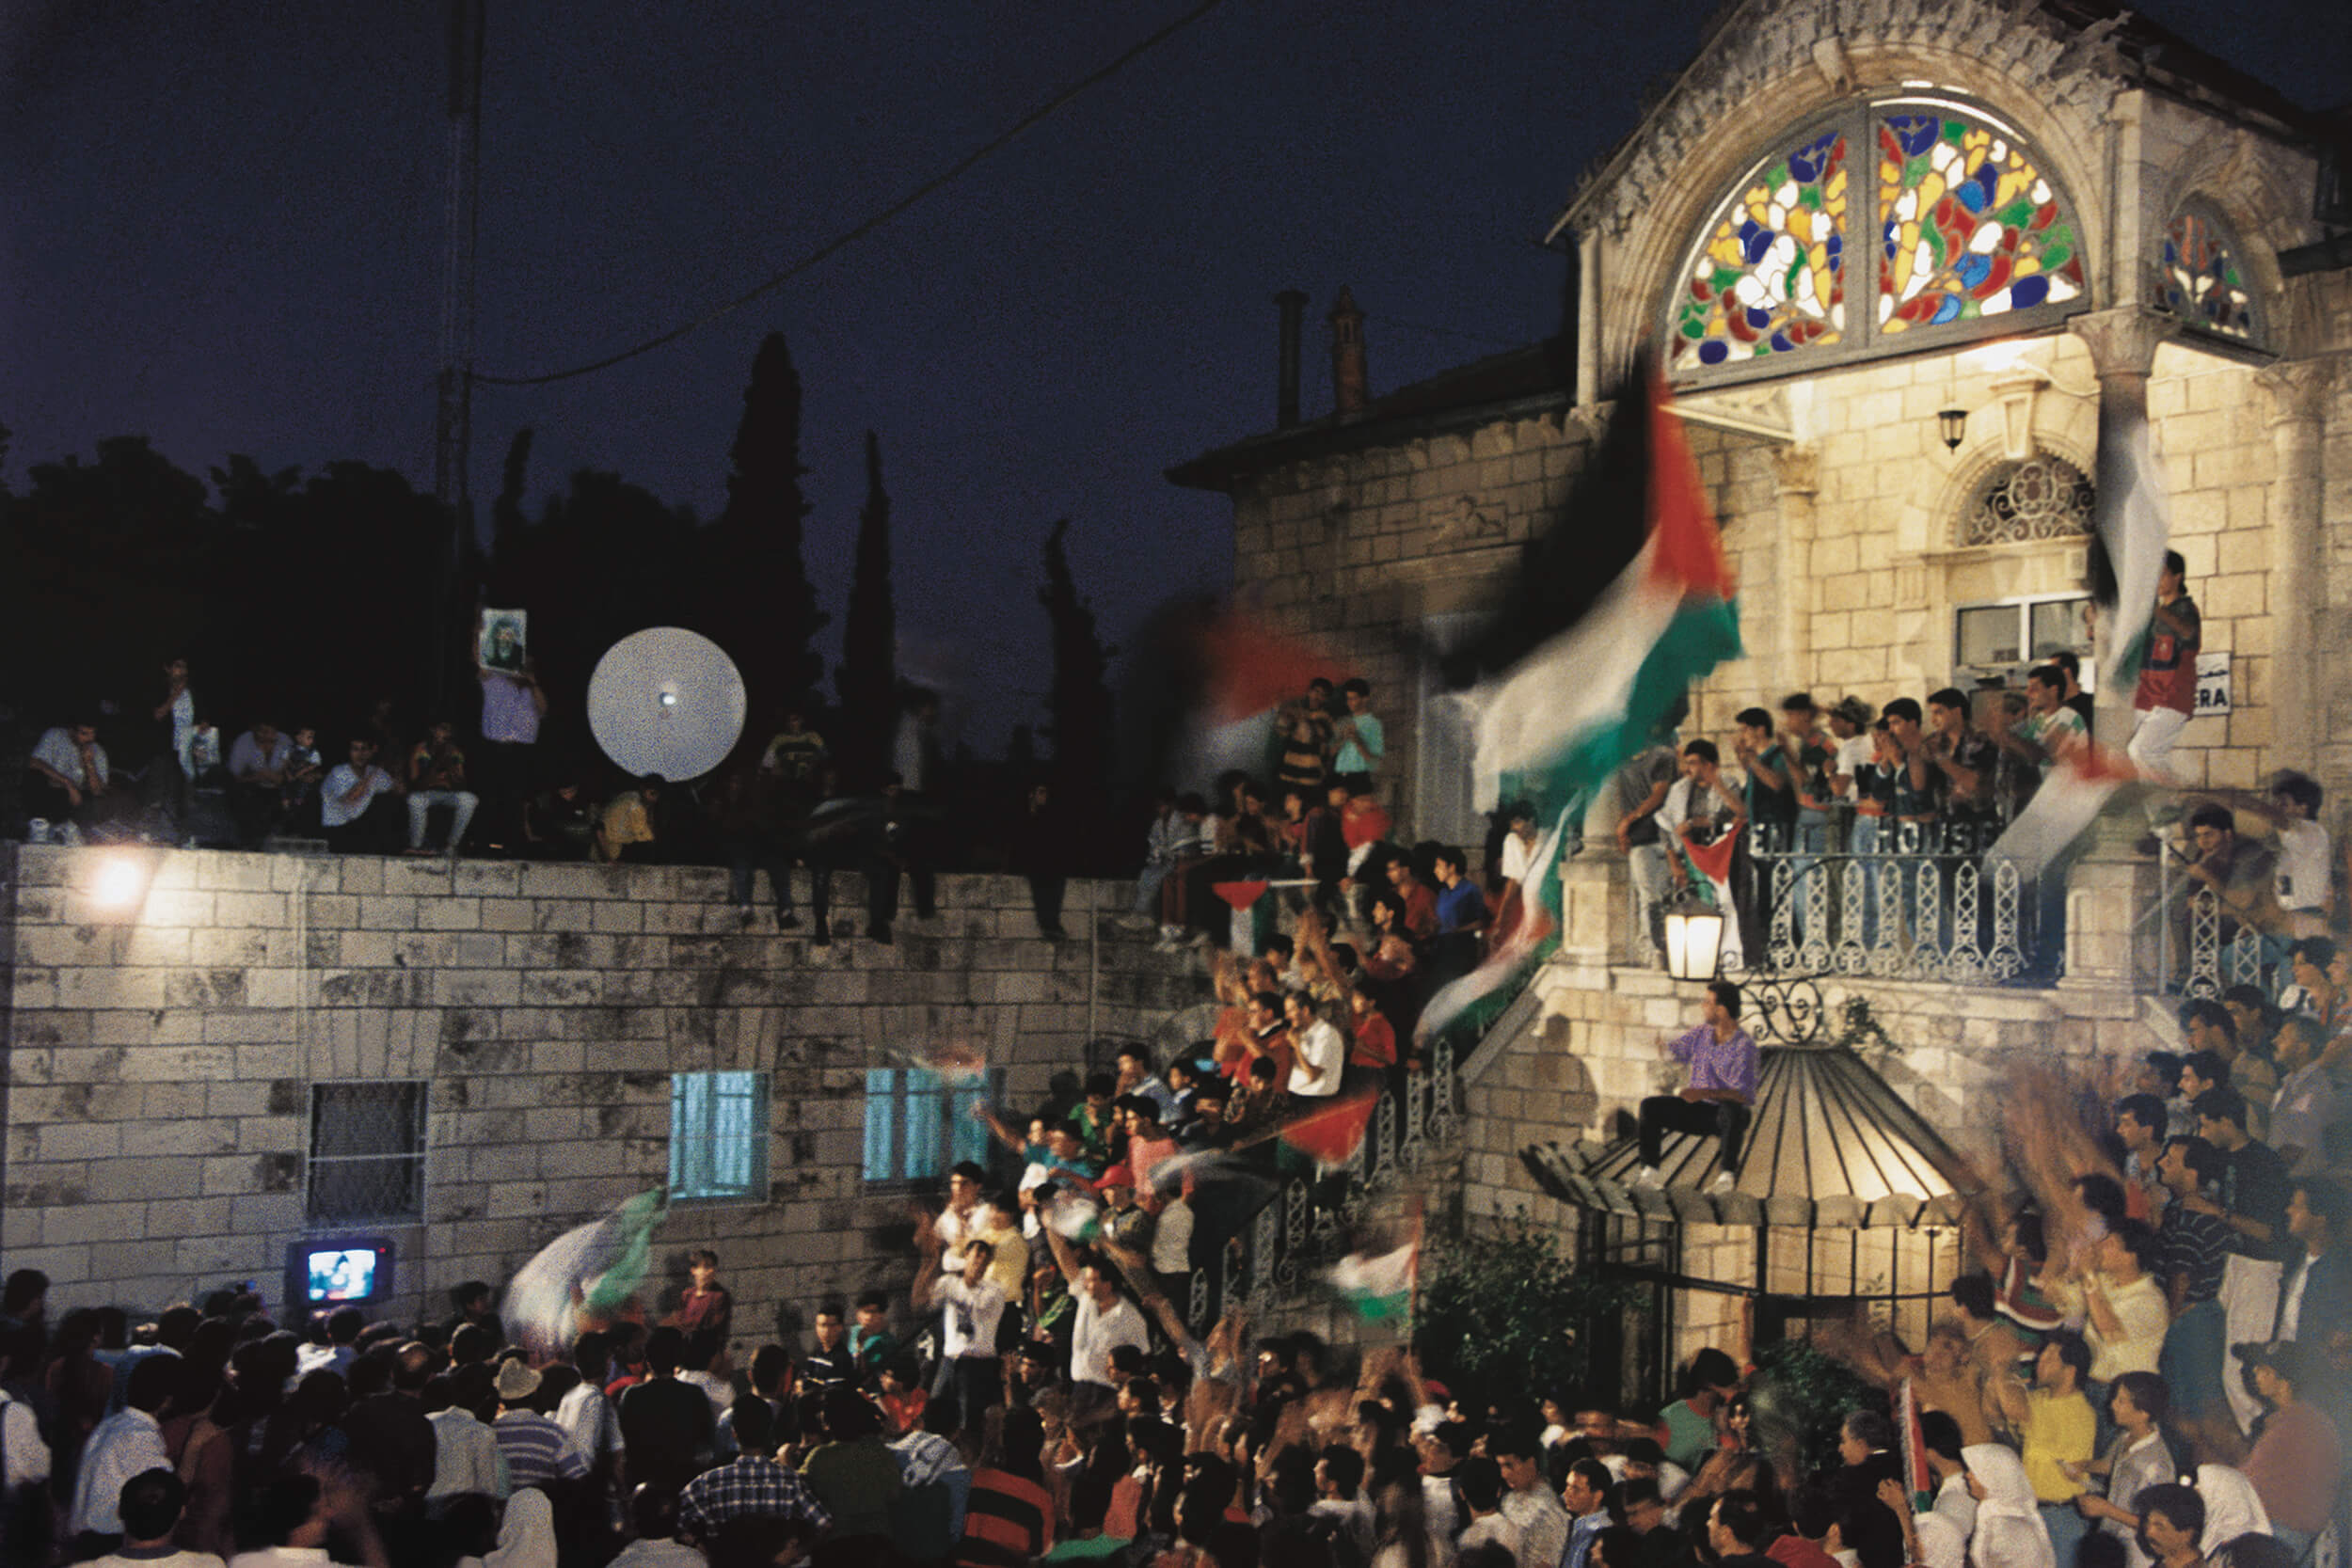  September 13, 1993. At the Palestinian headquarter, Orient House, Palestinians gathered to celebrate the peace agreement. 